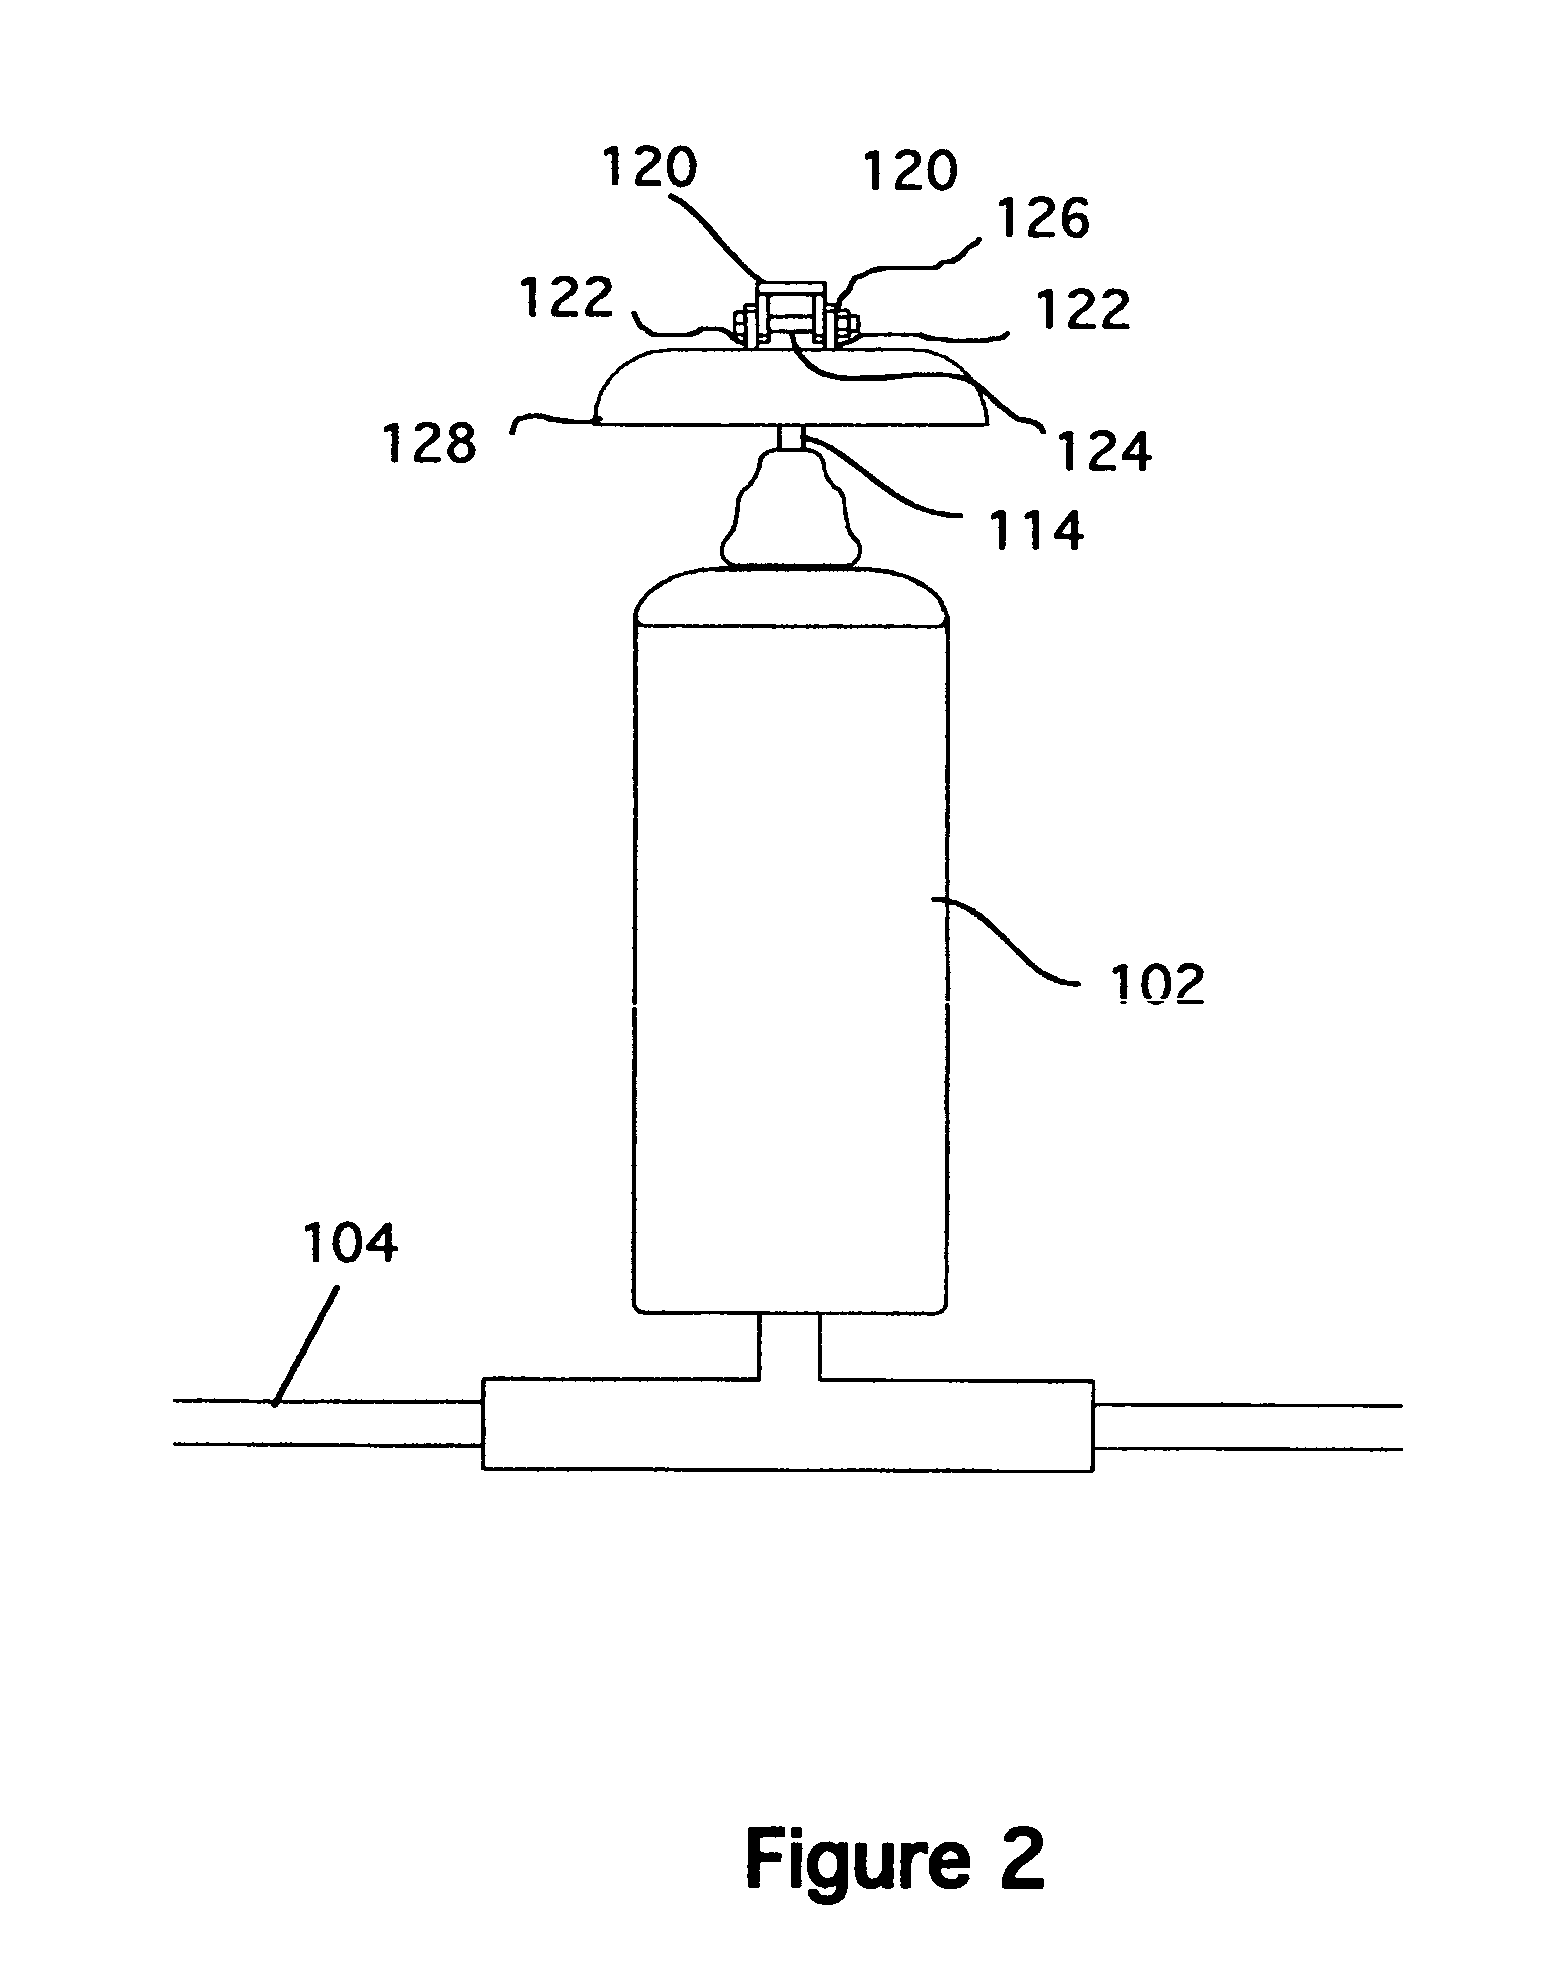 Longitudinal load limiting devices for transmission lines and the like